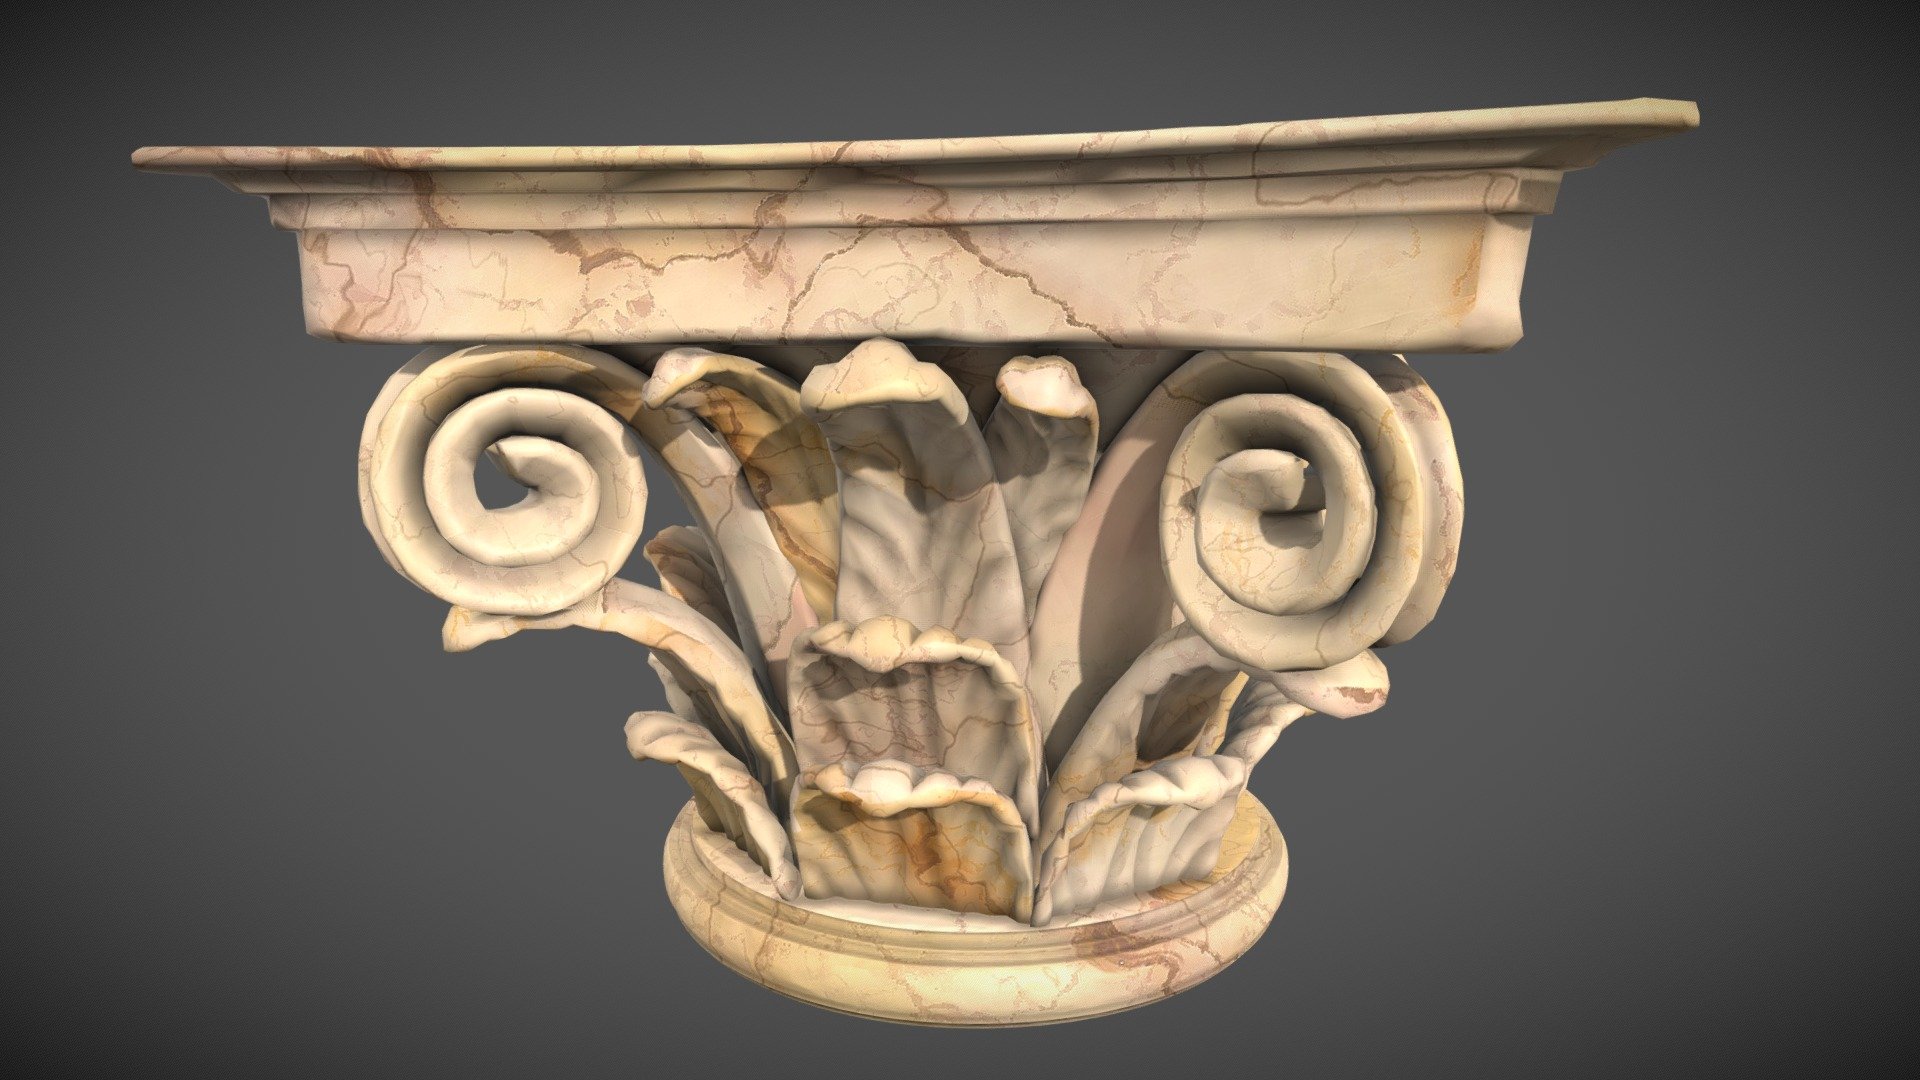 Realistic Ancient Roman Pillar Capital. Part of the Ancient Roman environment collection. Please, feel free to use it in any way. Likes are much appreciated.

Hope you like it.

Tibor - Ancient Roman Pillar Capital - Download Free 3D model by tiborjanas.art 3d model